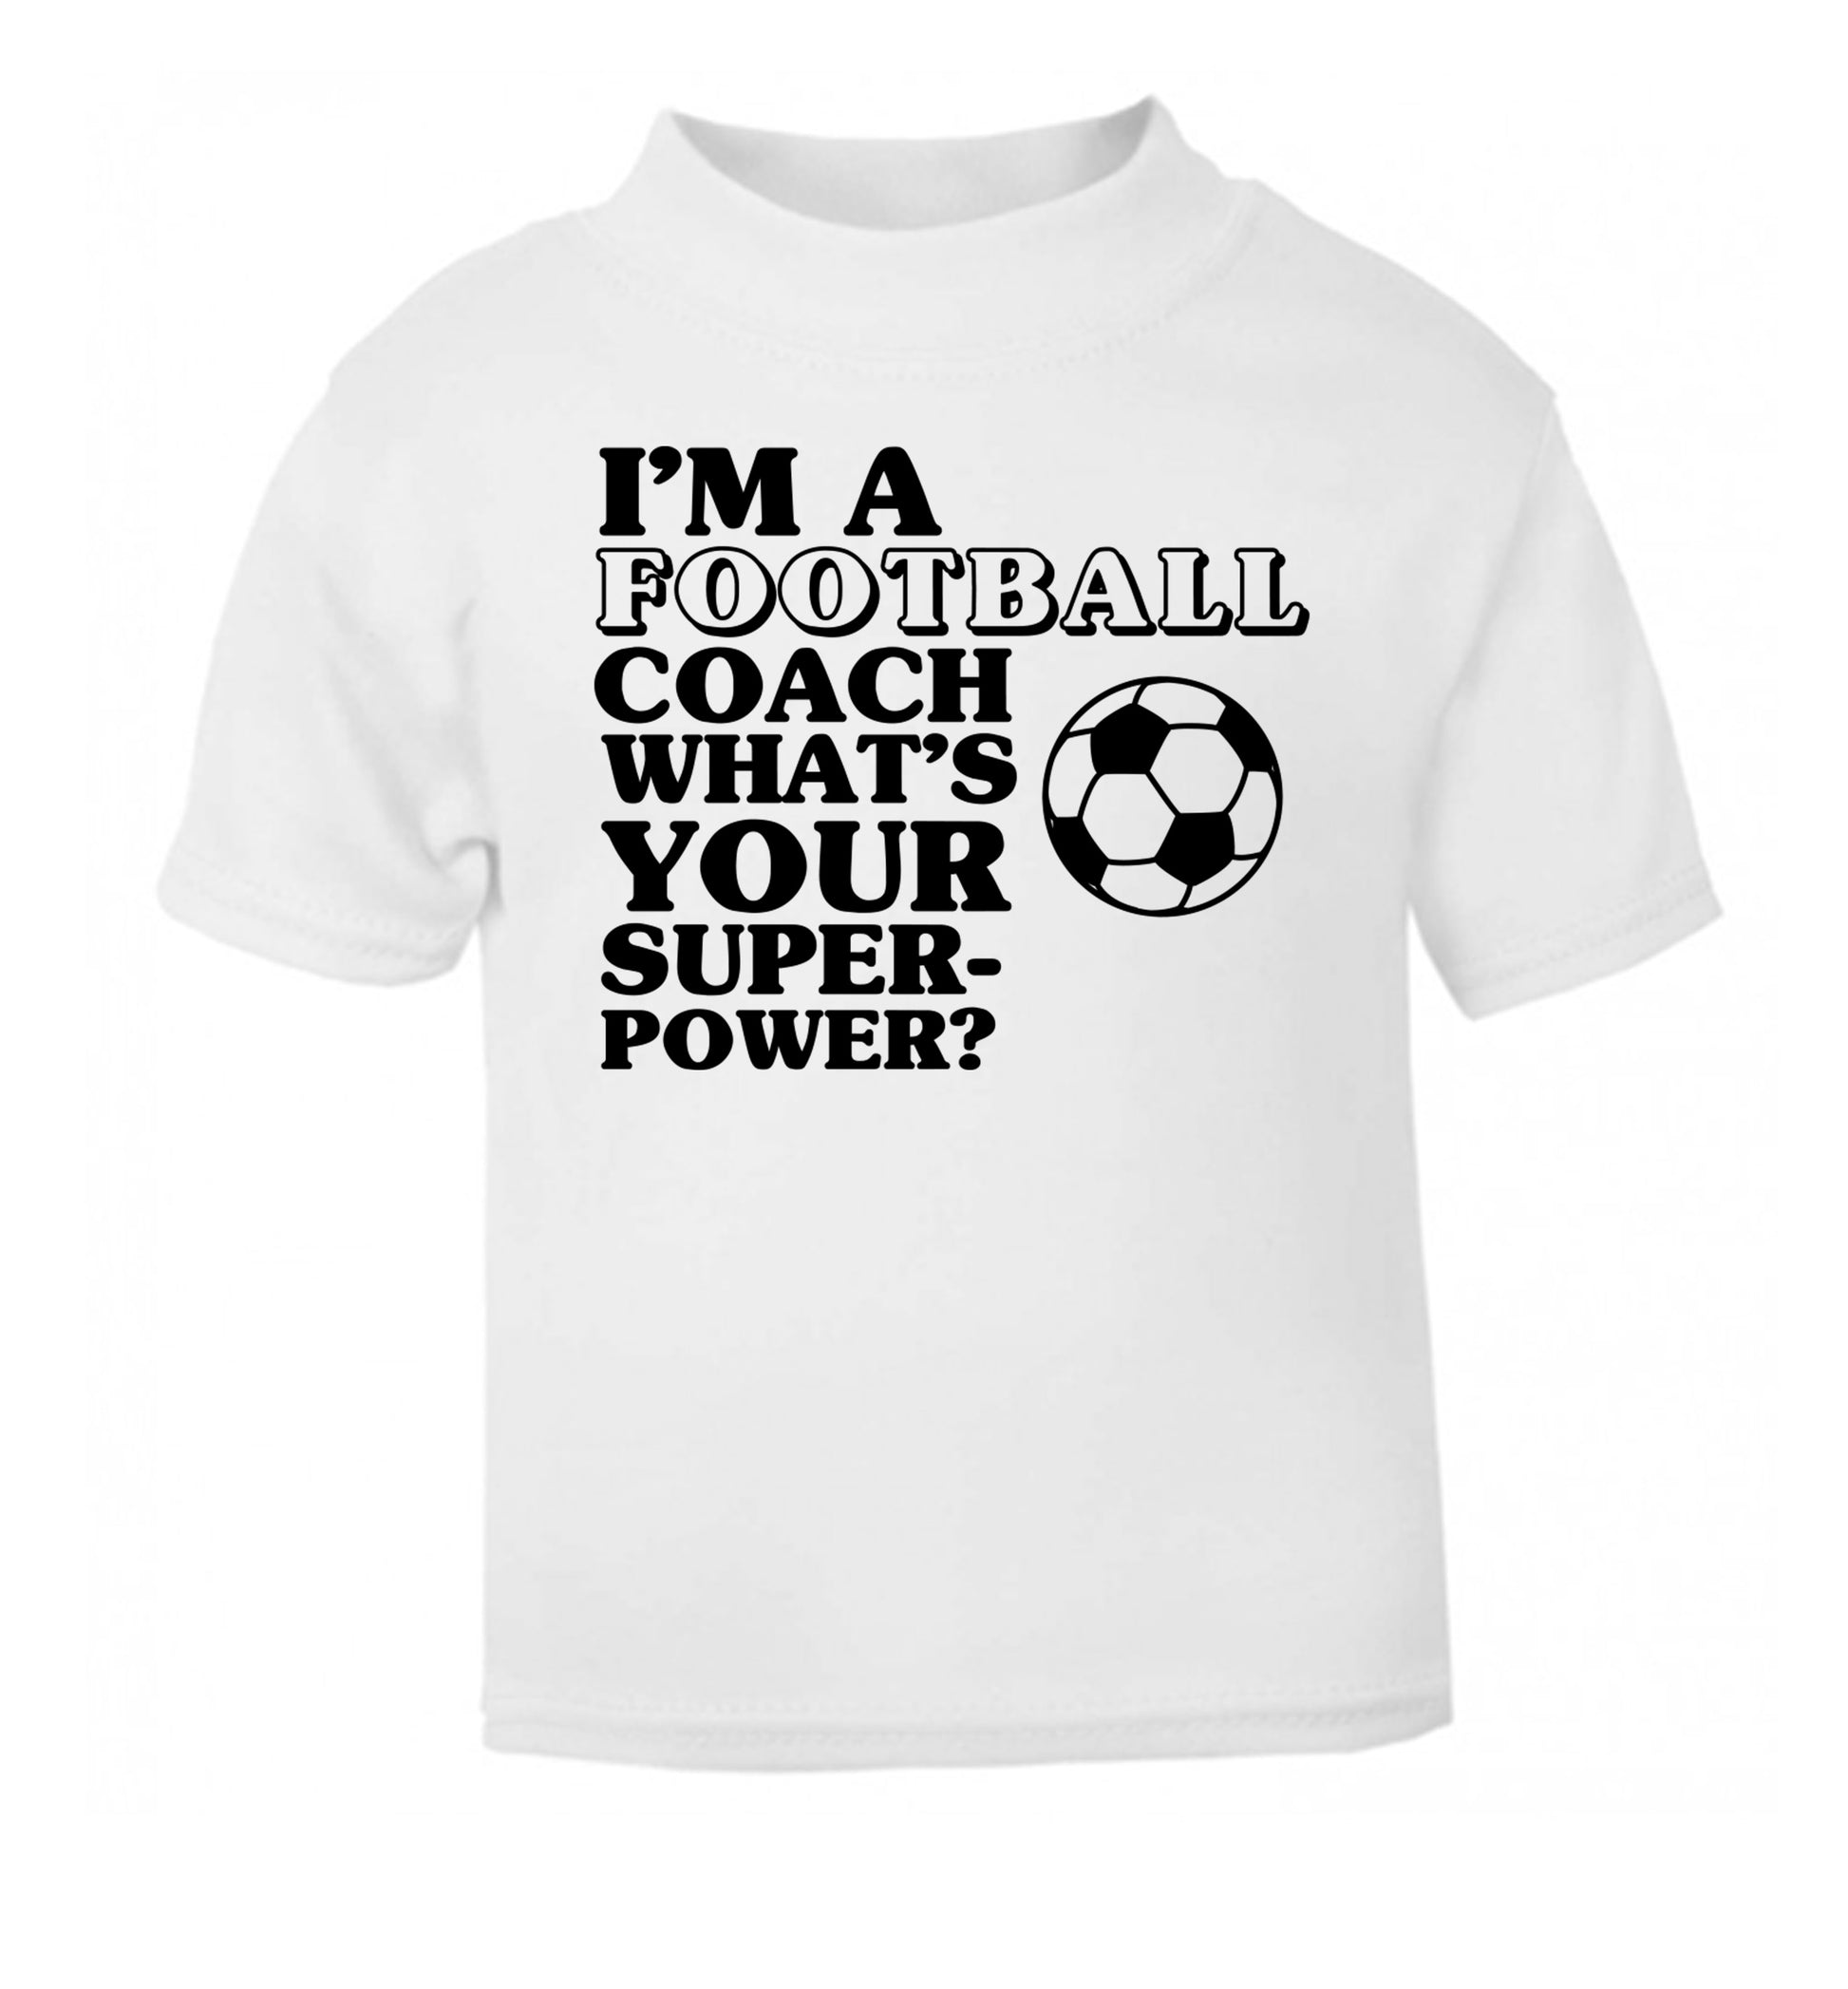 I'm a football coach what's your superpower? white Baby Toddler Tshirt 2 Years